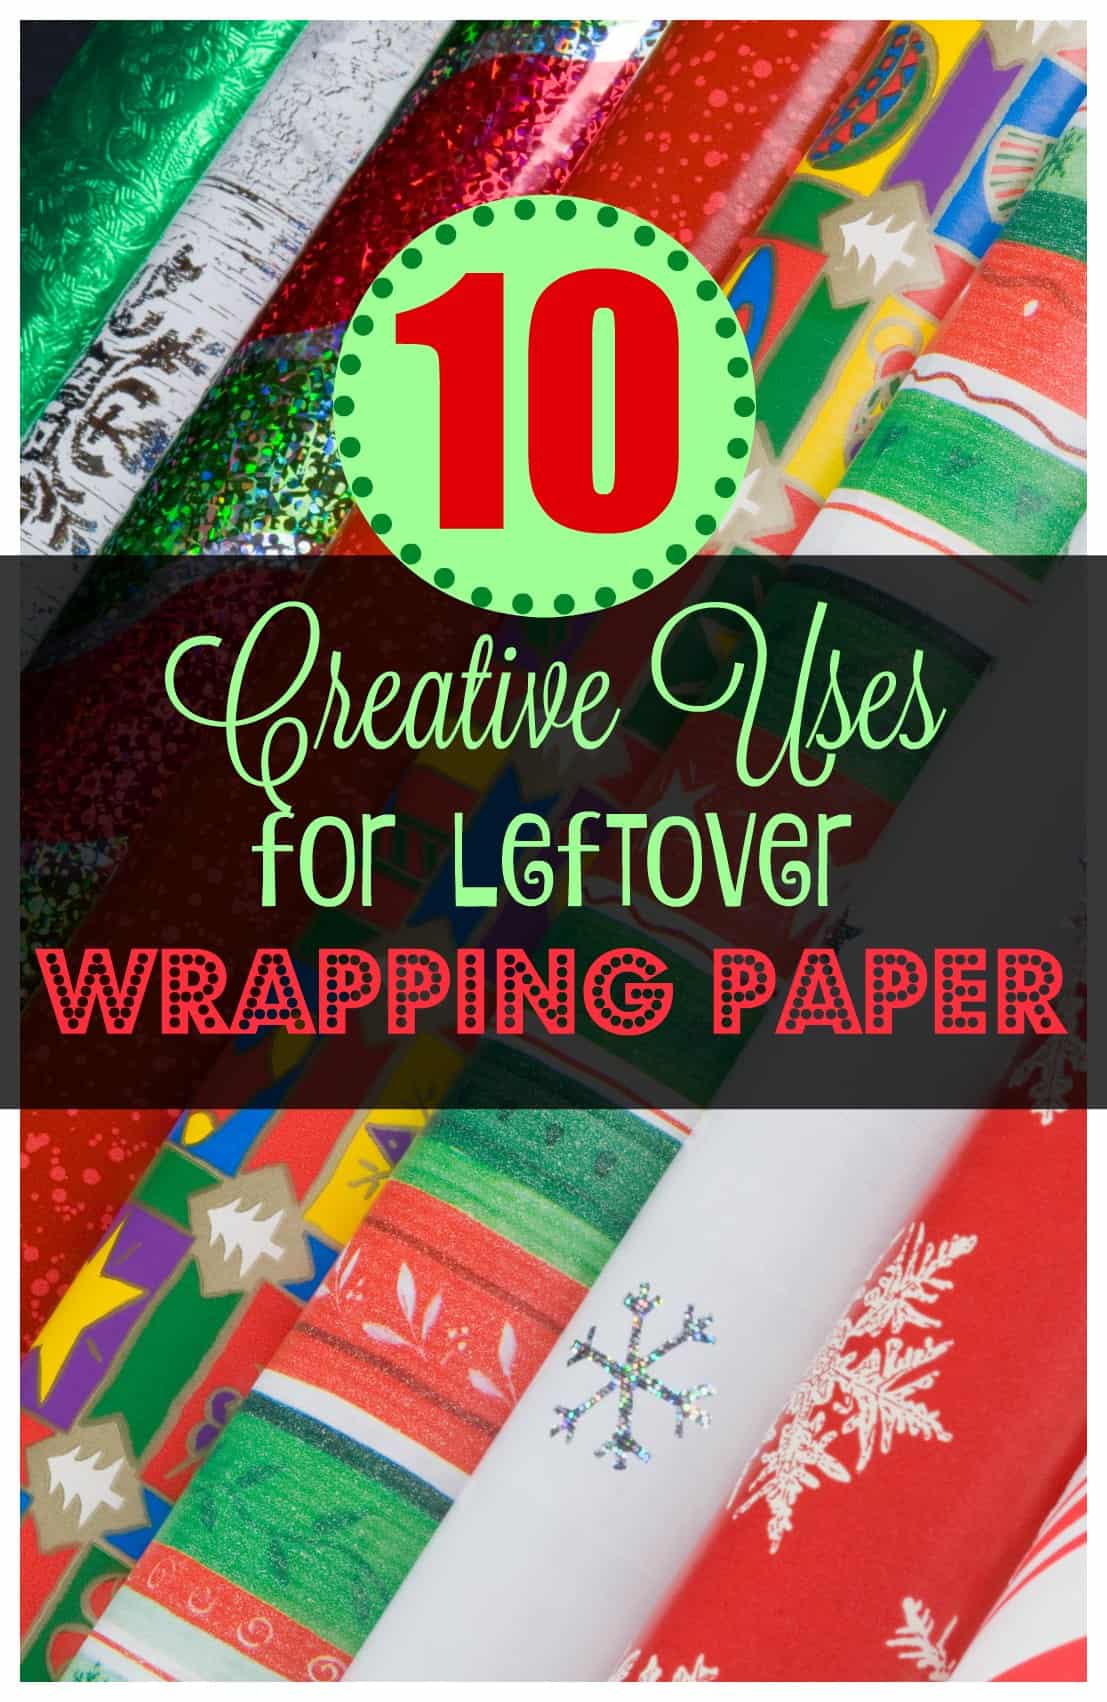 10 Creative Uses for Leftover Wrapping Paper